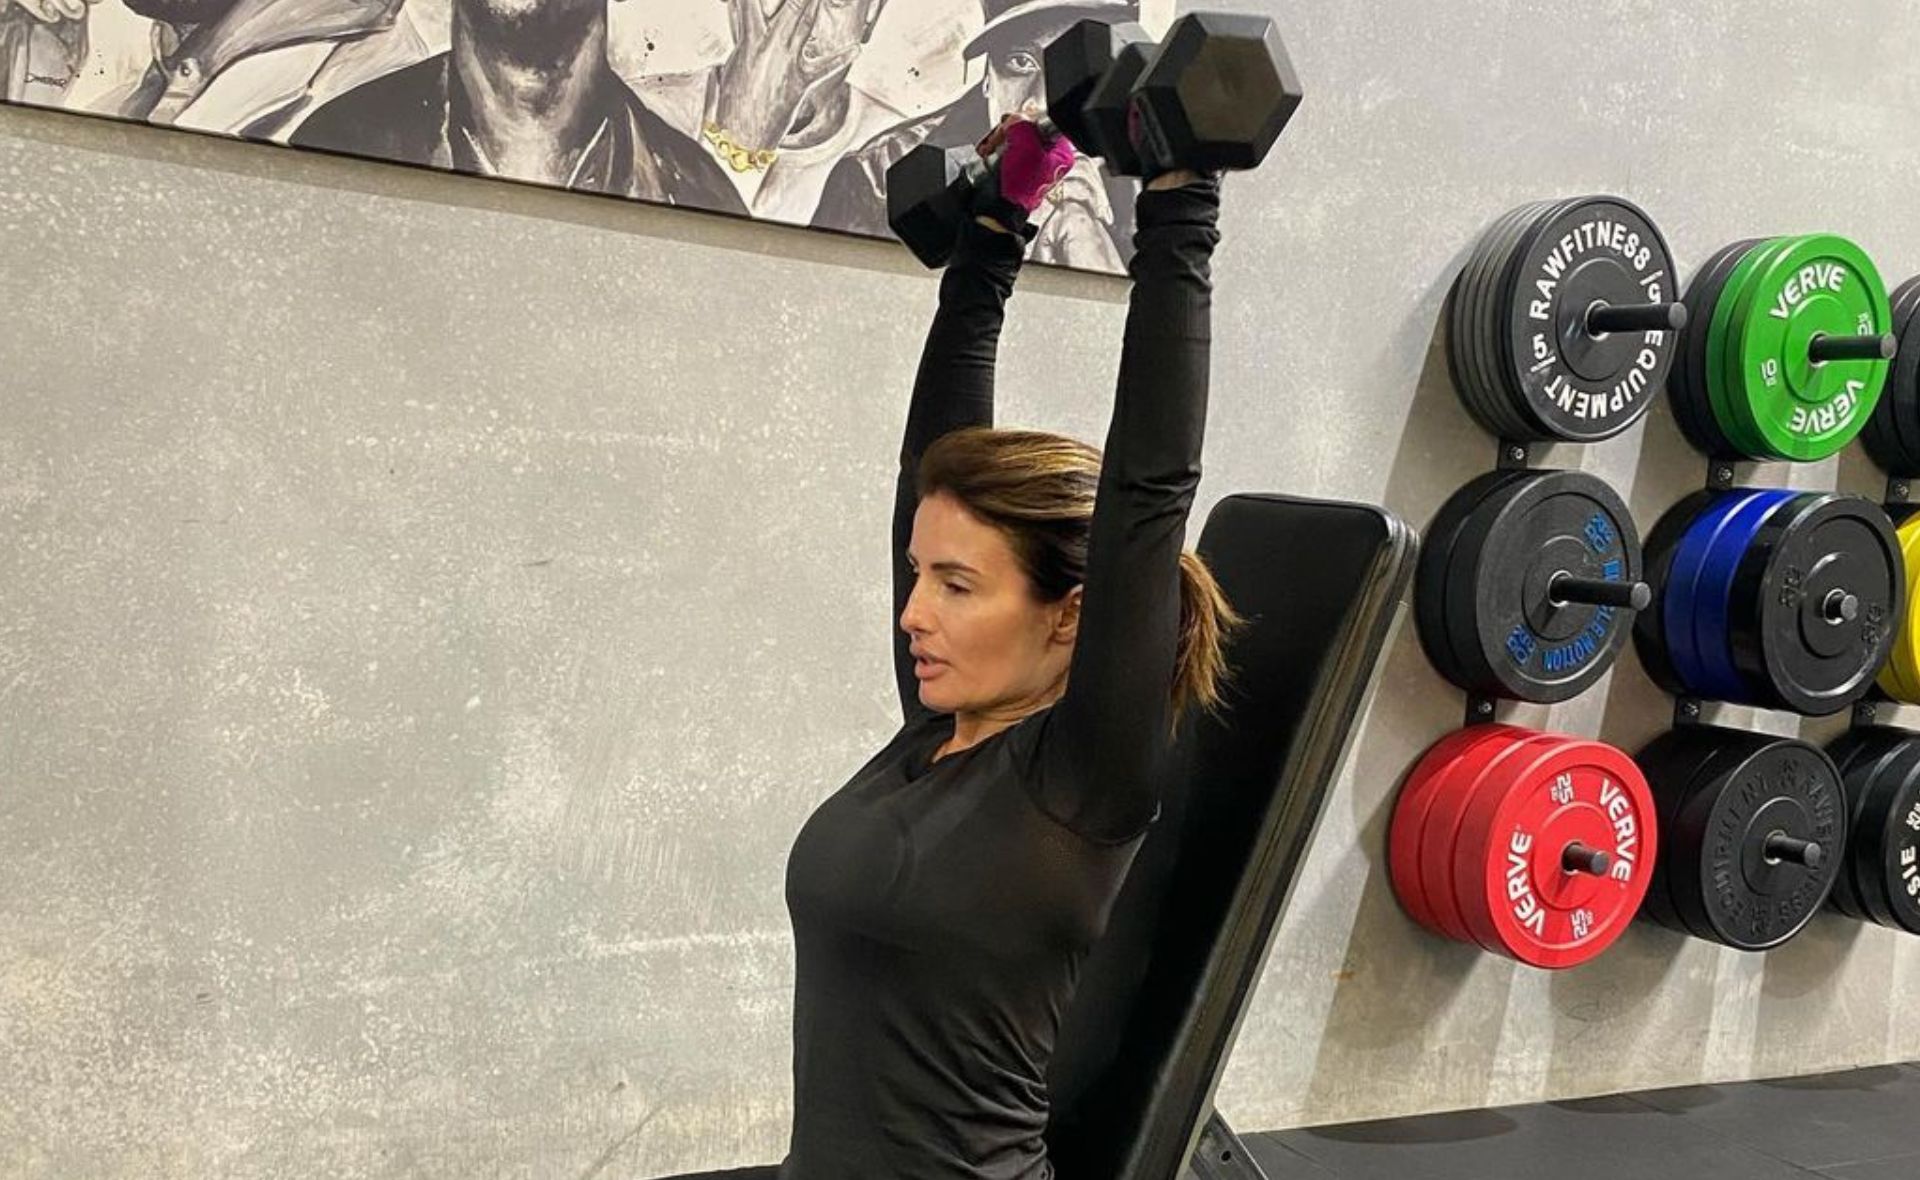 When Ada Nicodemou turned 41, she decided to rejuvenate her workout routine and has never looked back